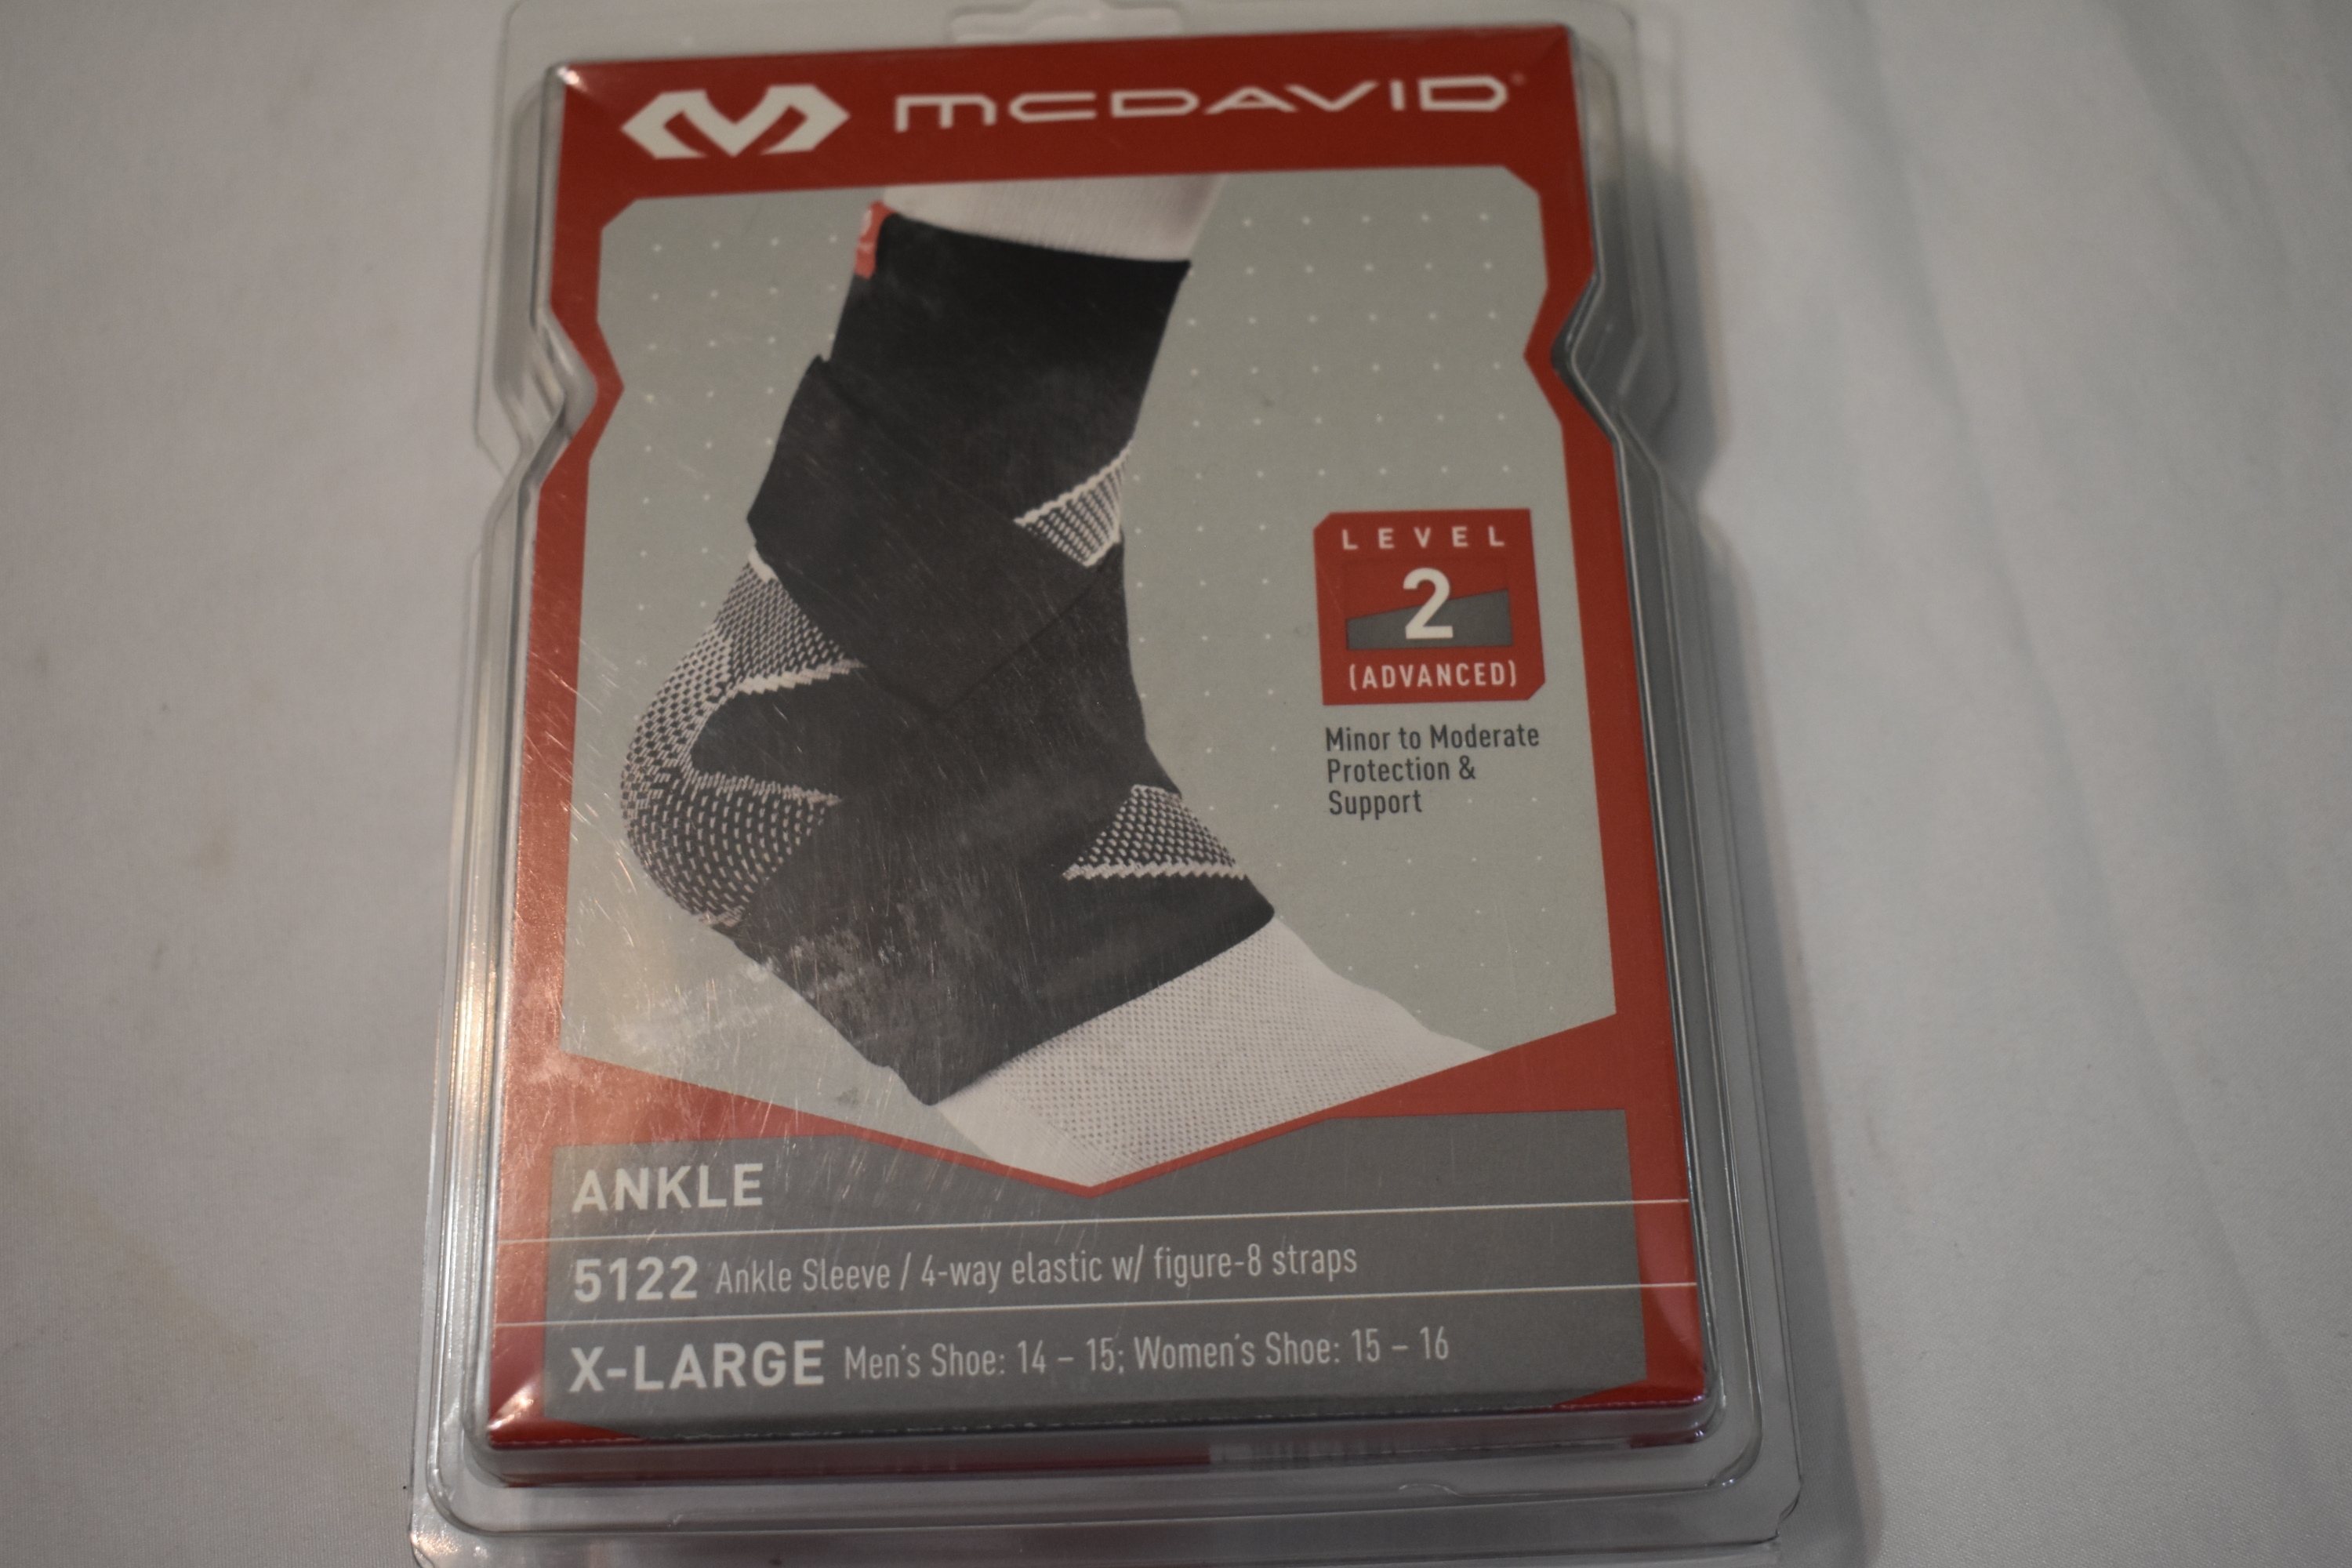 NEW - Large McDavid 5122 Level 2 Compression Ankle Support Sleeve, Adult XL